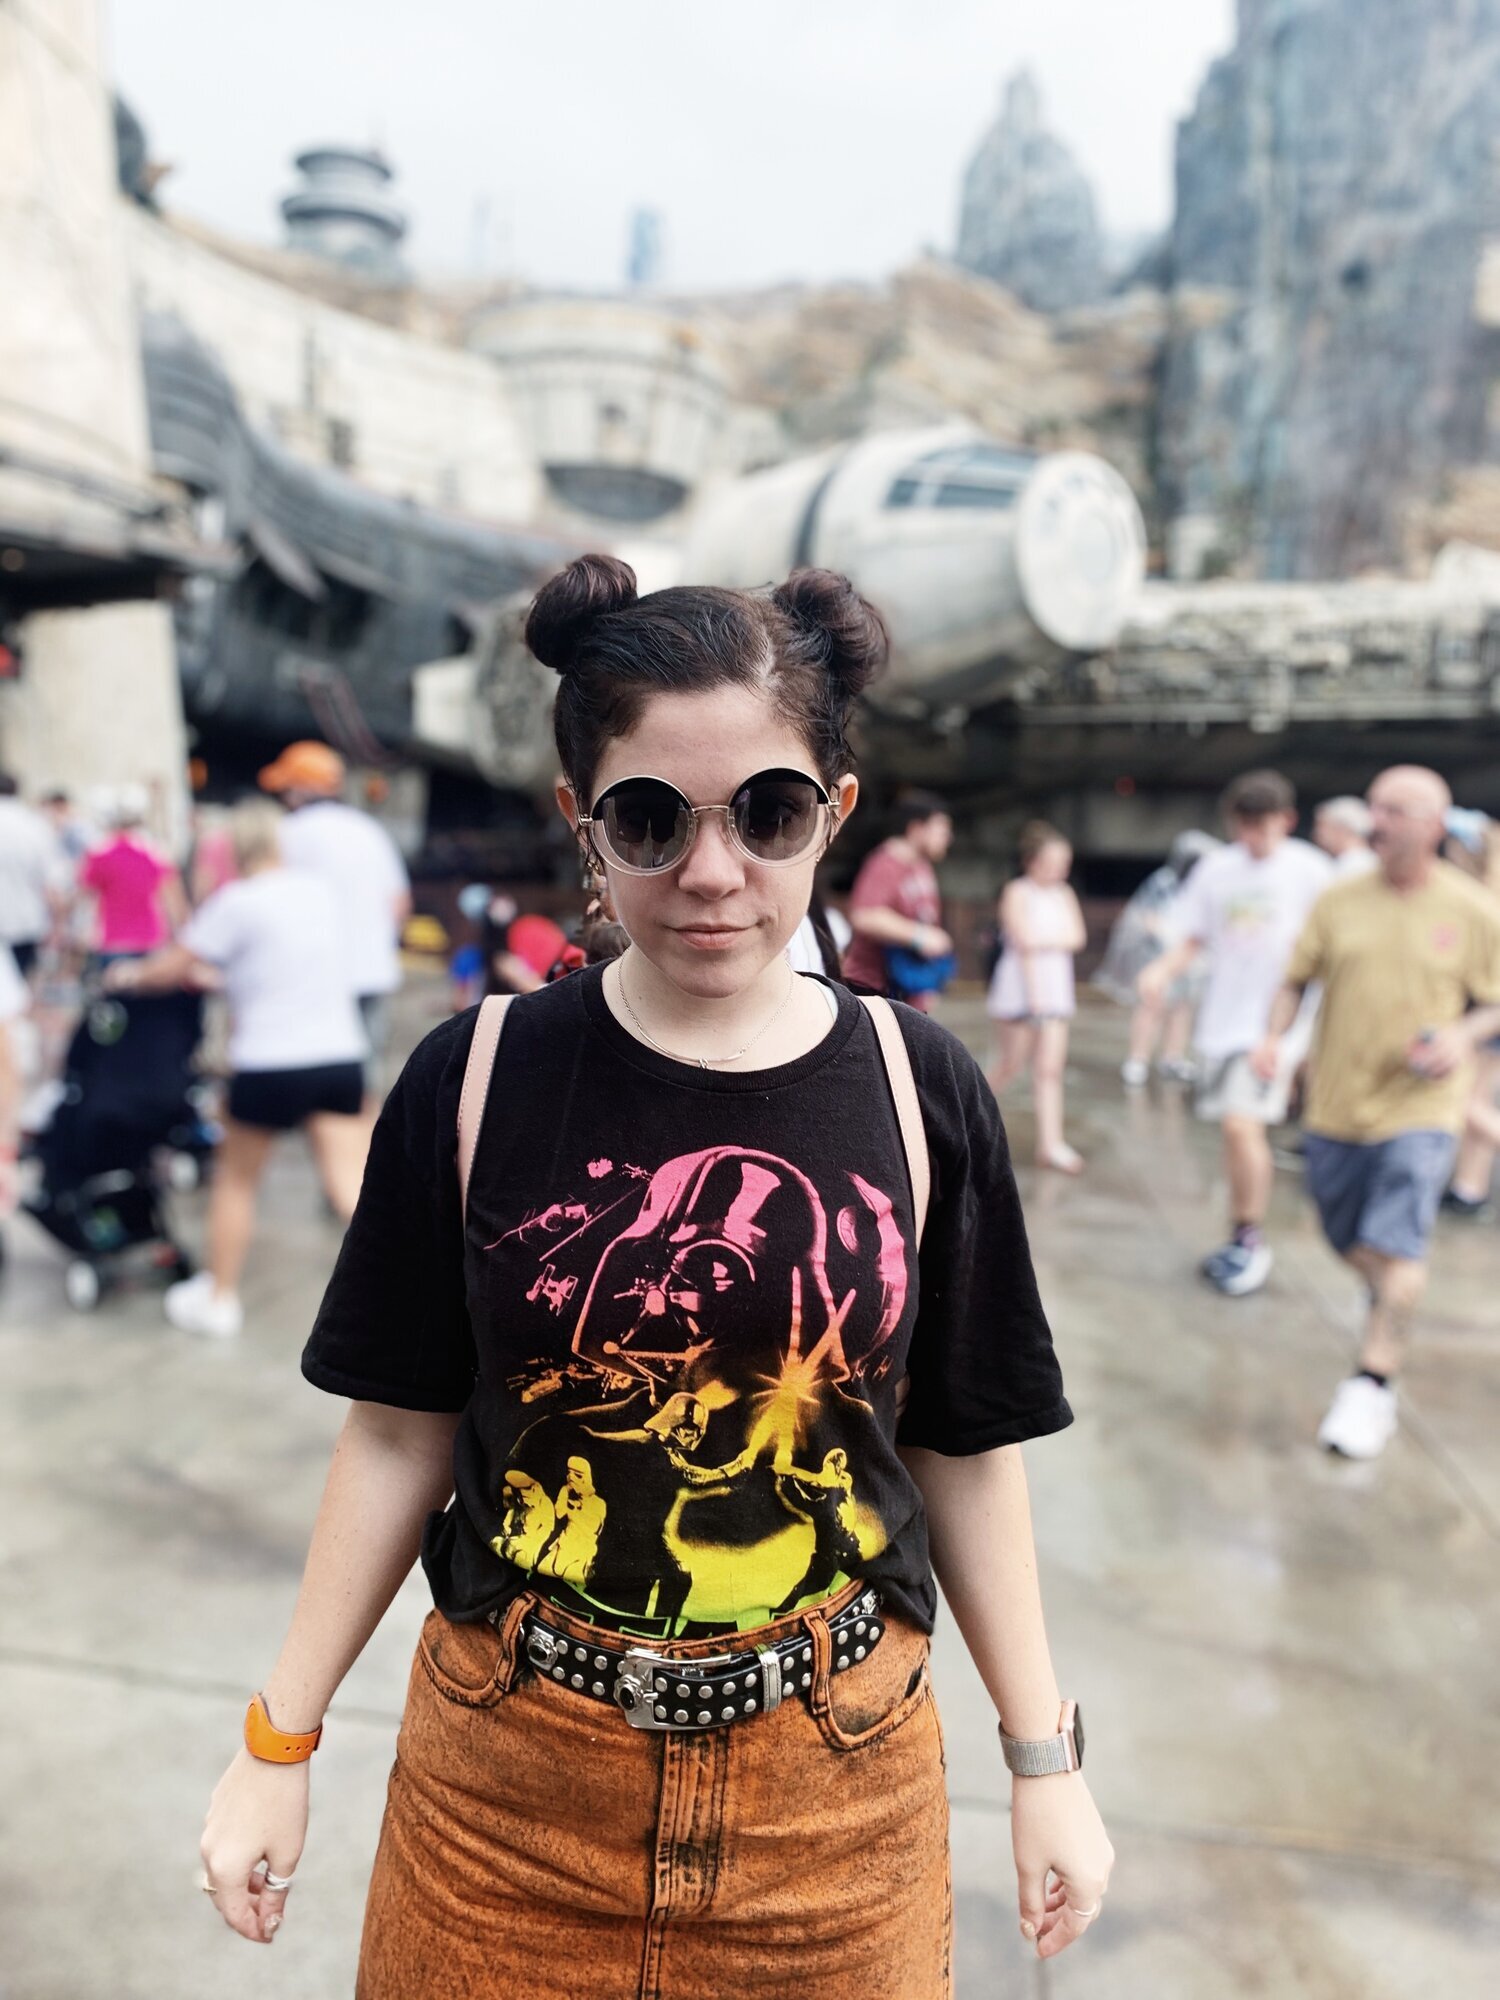 What to do at Star Wars: Galaxy's Edge at Disney World